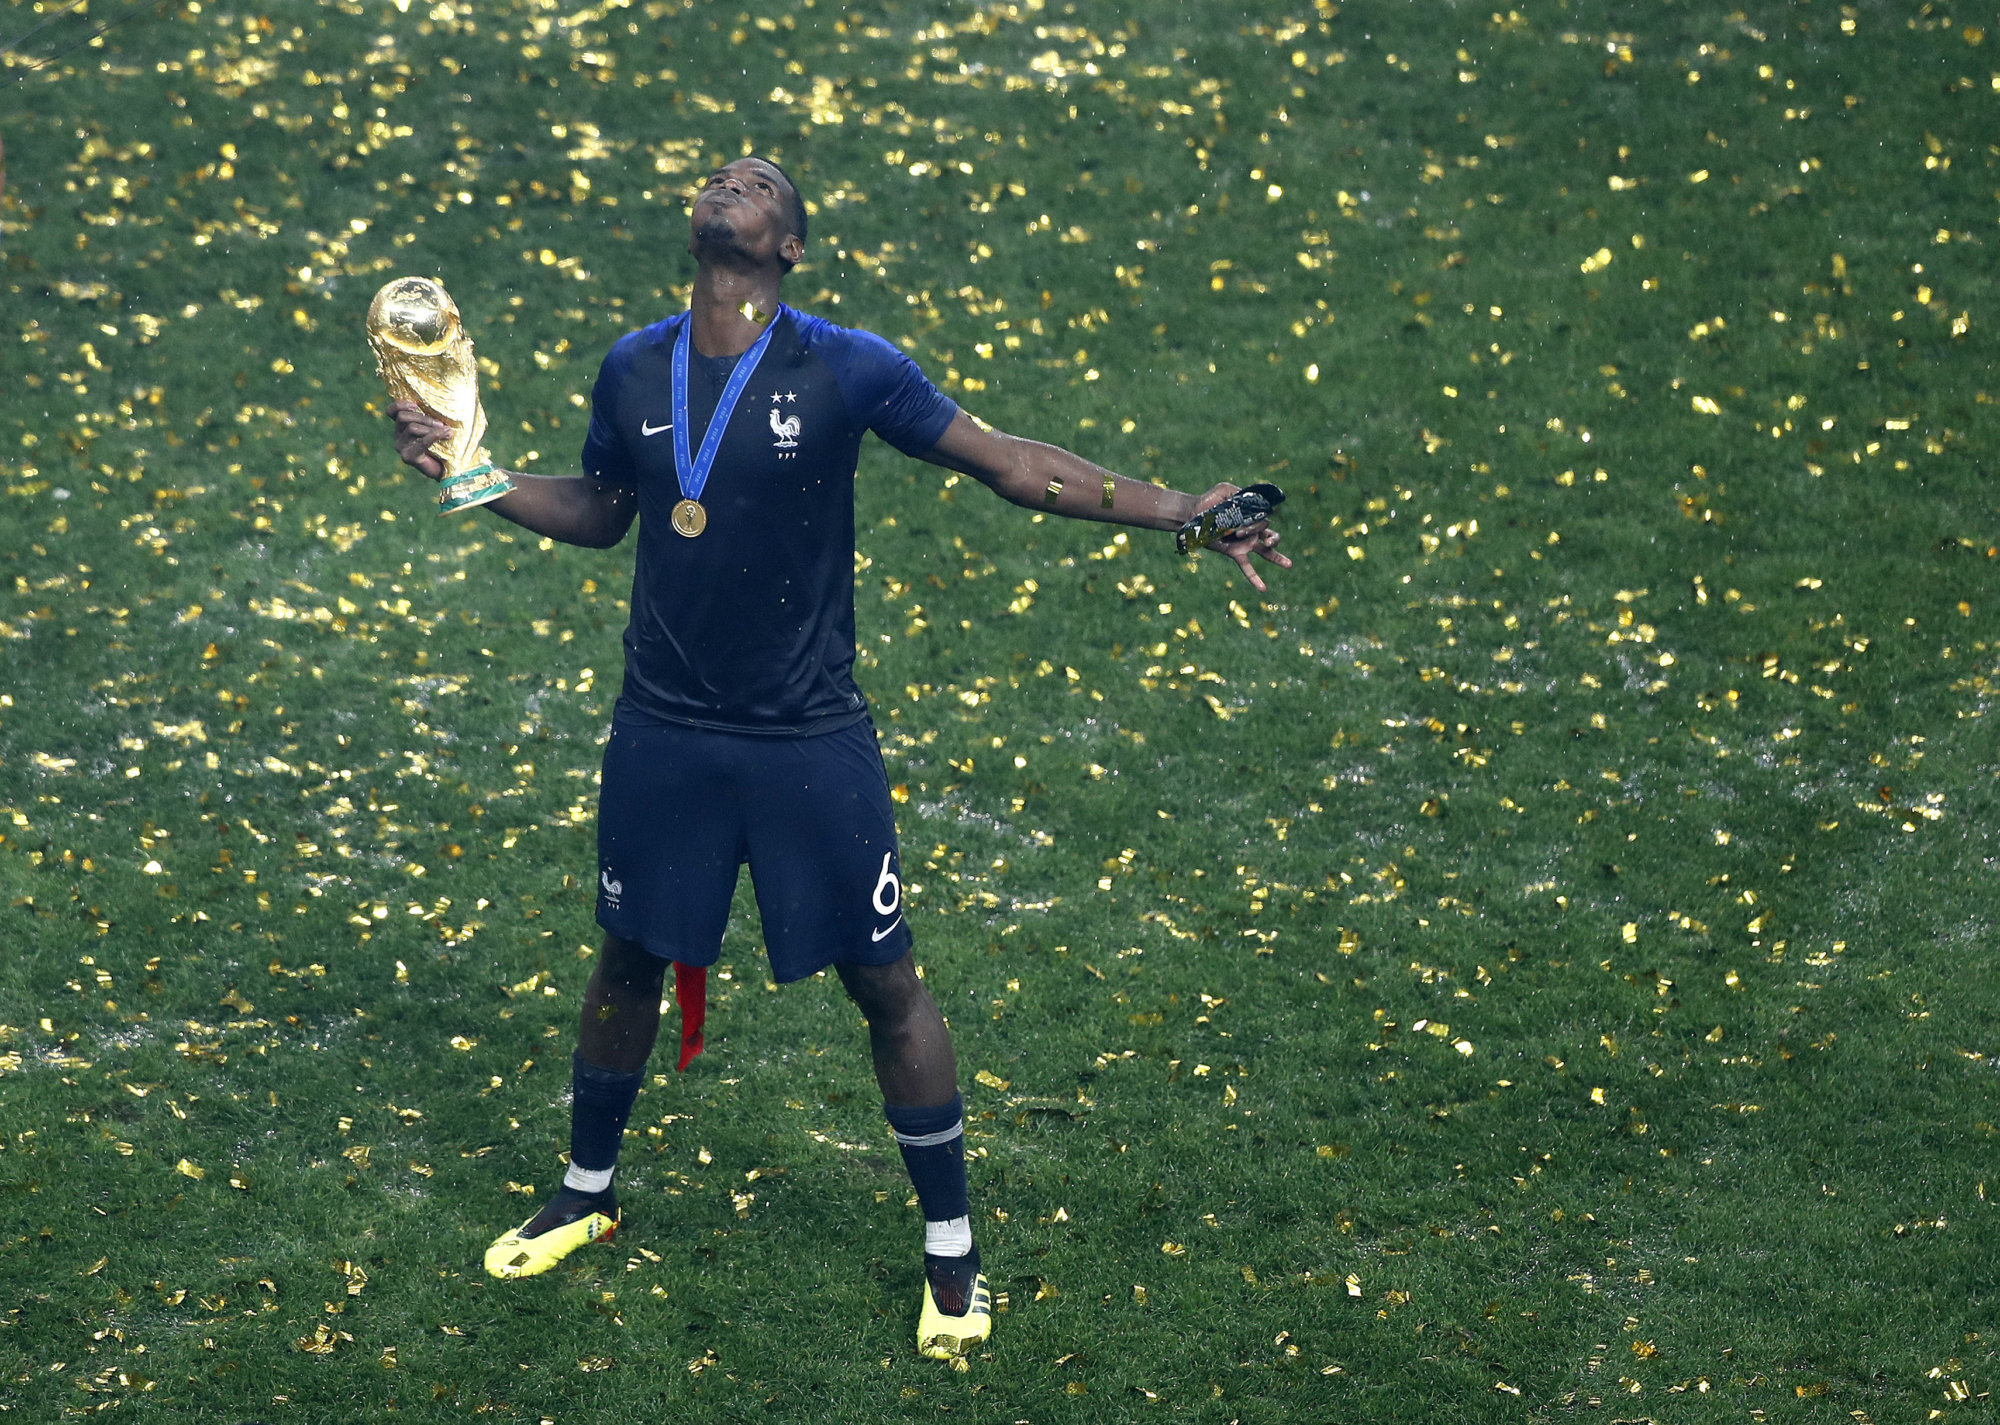 France's Paul Pogba celebrates with the trophy after winning the final match between France and Croatia at the 2018 soccer World Cup in the Luzhniki Stadium in Moscow, Russia, Sunday, July 15, 2018. (AP Photo/Frank Augstein)